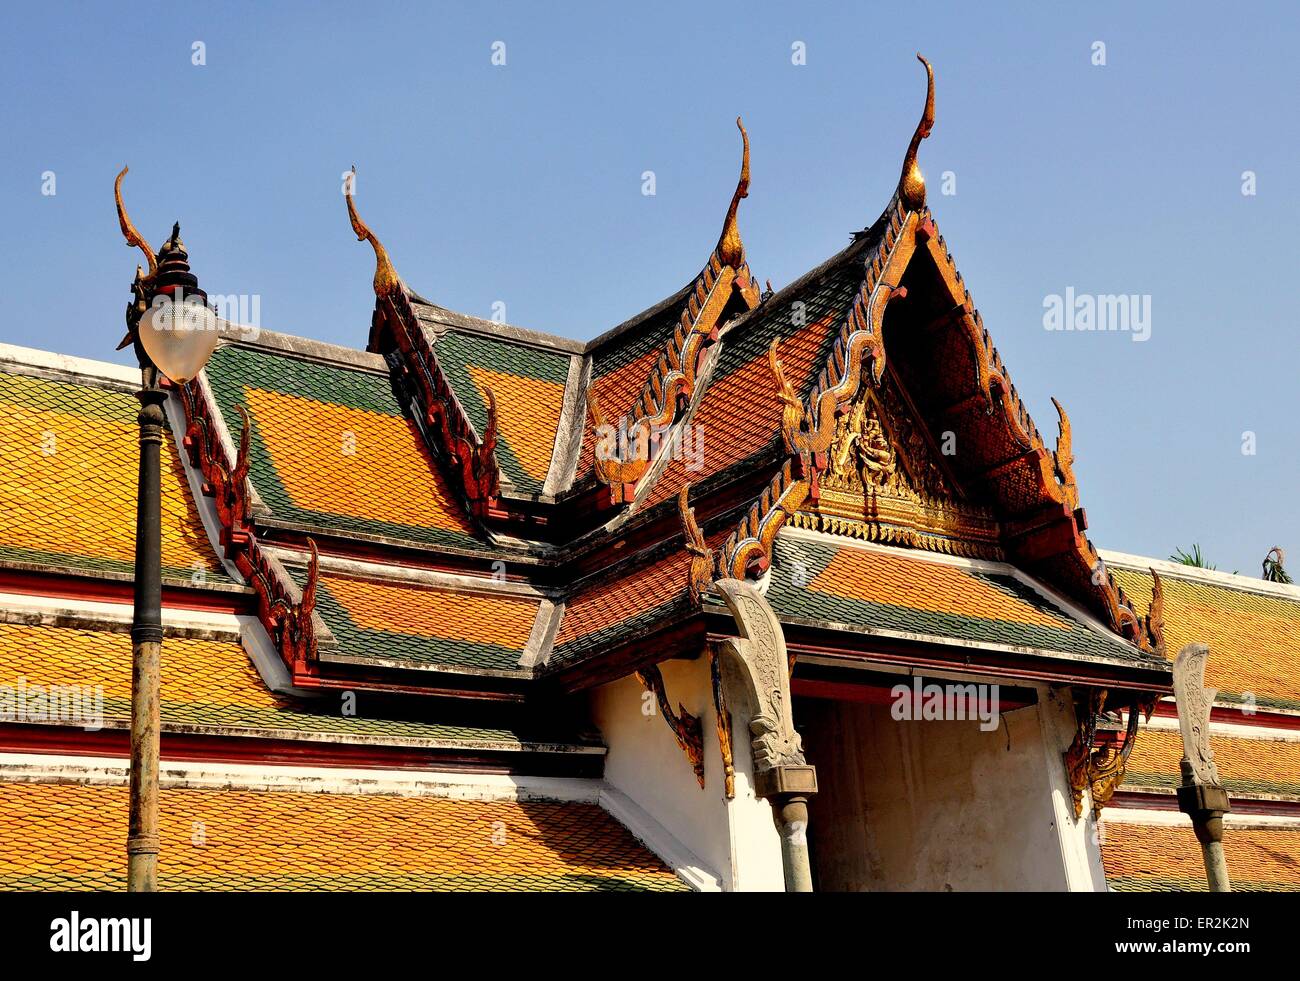 Bangkok, Thailand:  Step gabled roofs with chofah ornaments over the cloister gallery at Wat Suthat Stock Photo